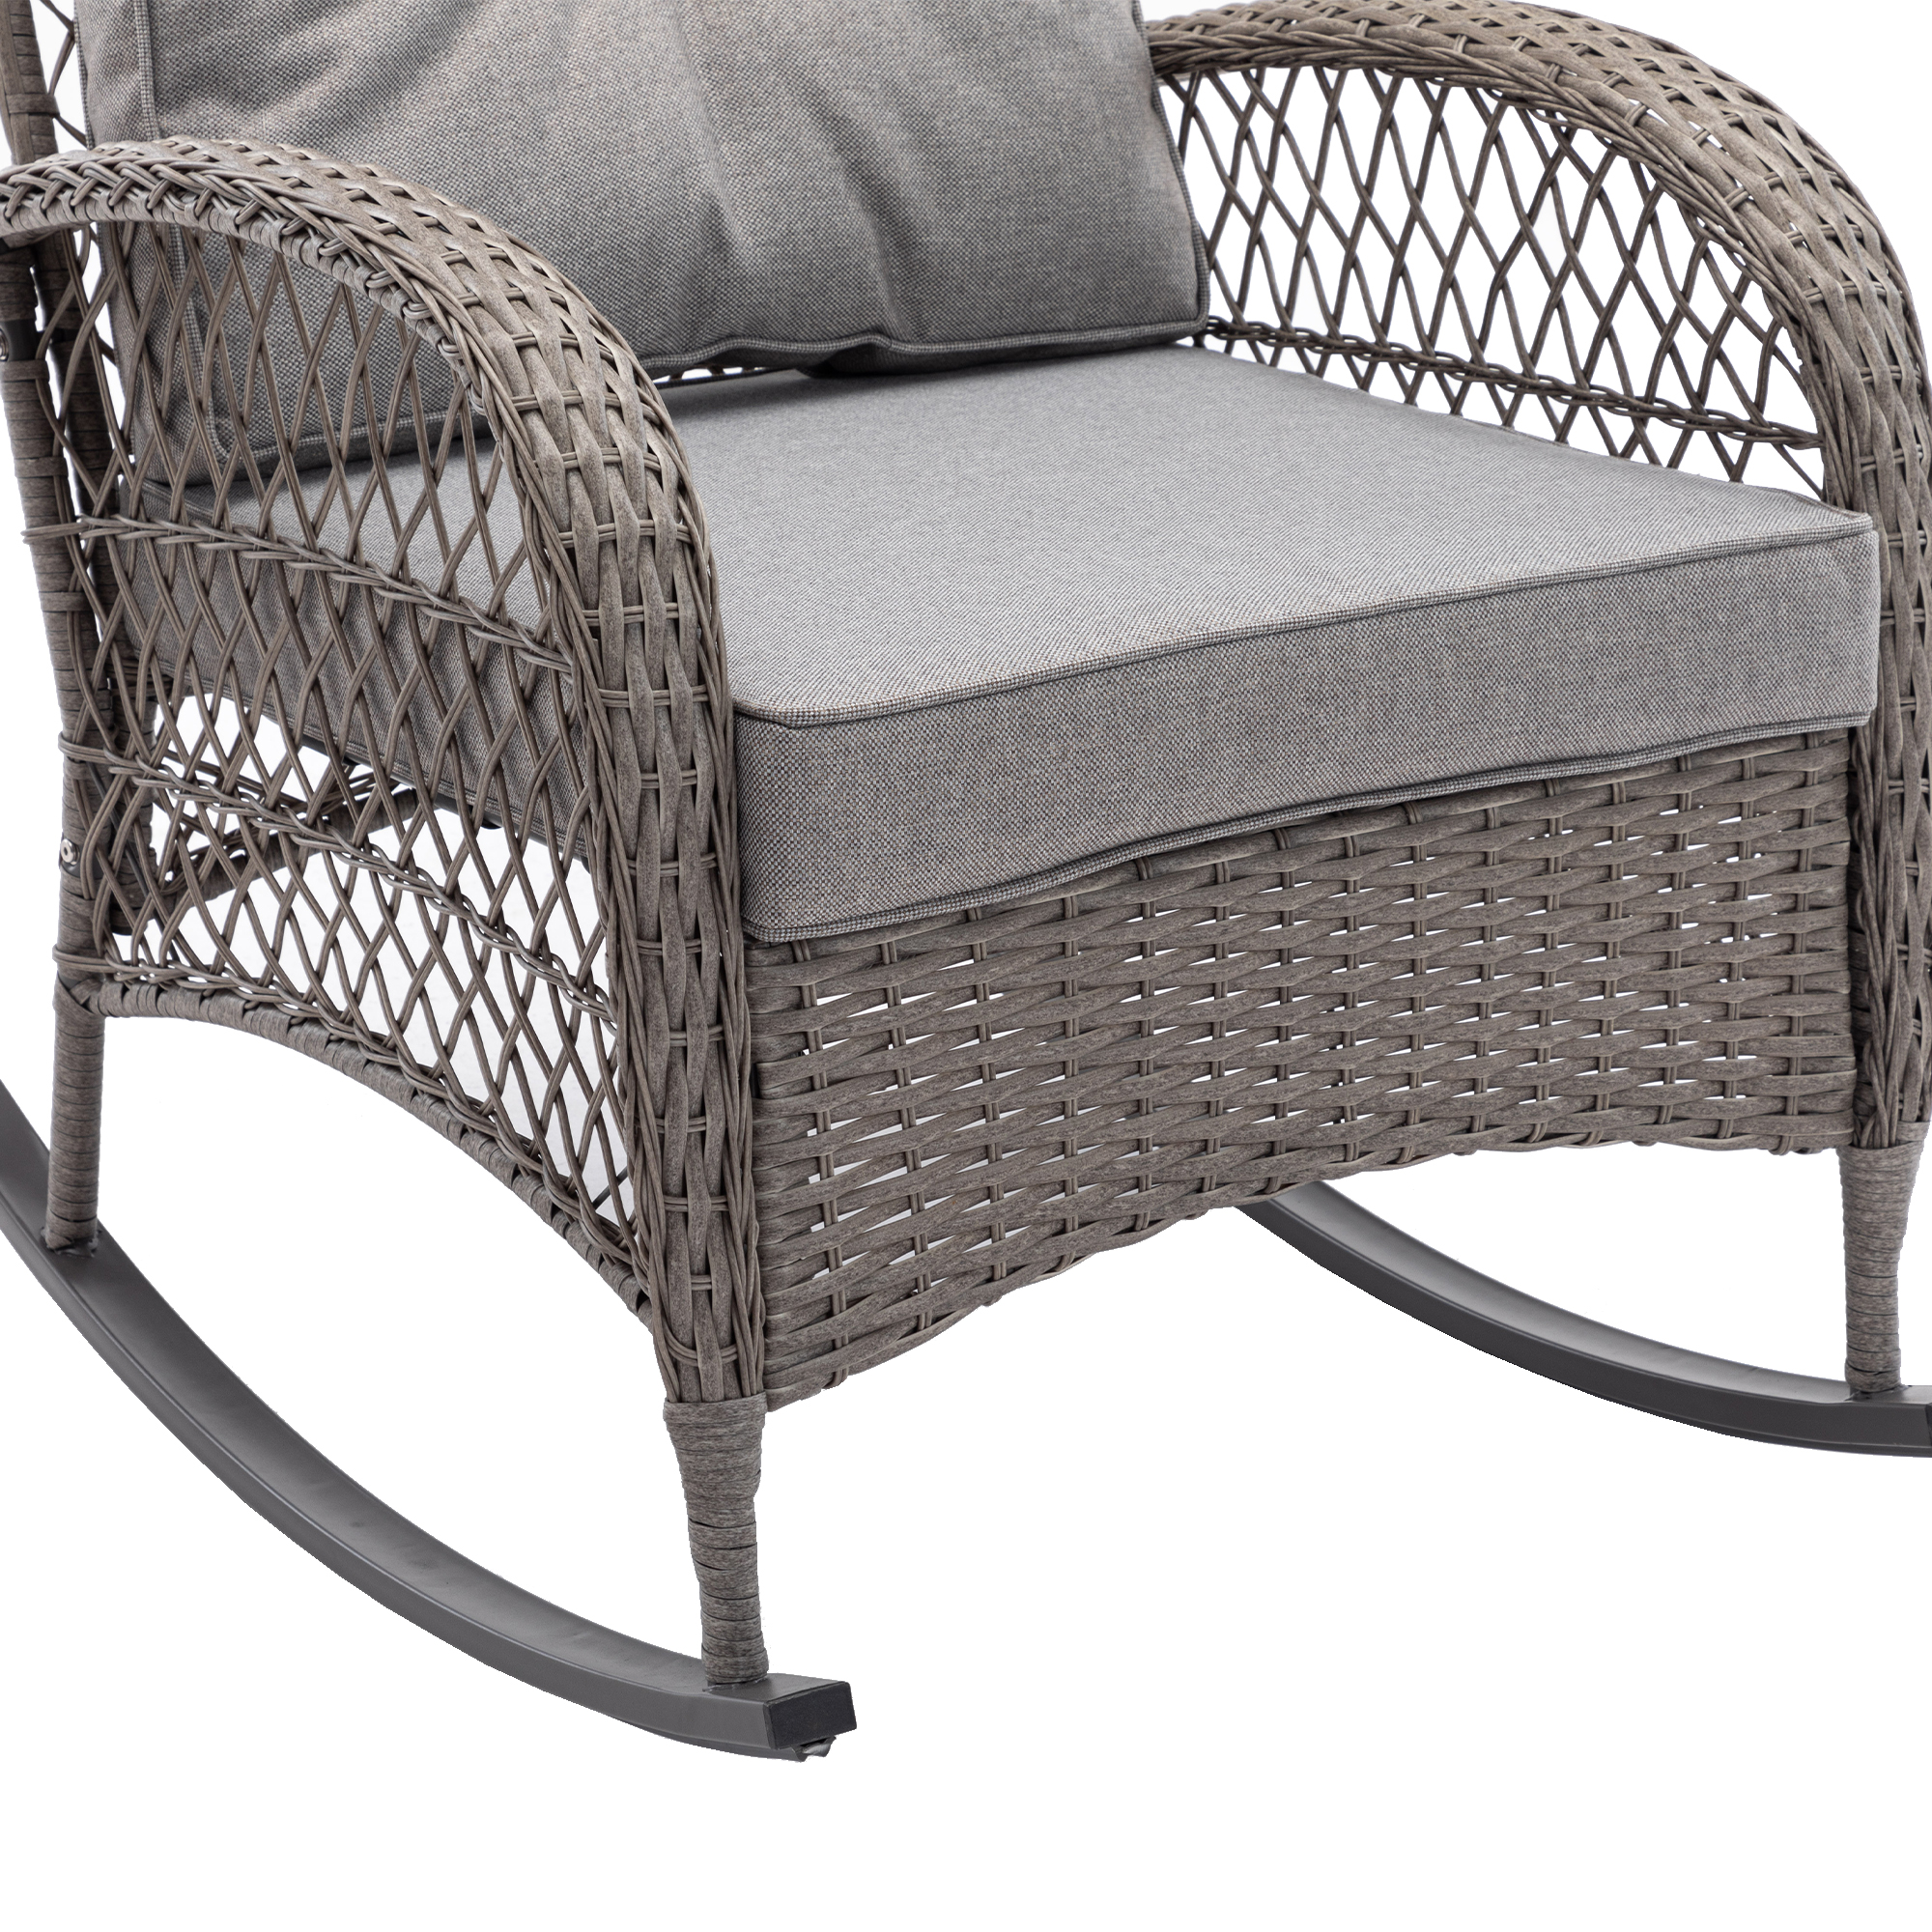 Royard Oaktree 3-Piece Patio Rocking Chair Outdoor Rattan Bistro Furniture Conversation Set with 2 Wicker Armchair and Glass Table for Porch Lawn Garden Backyard,Grey - image 4 of 7